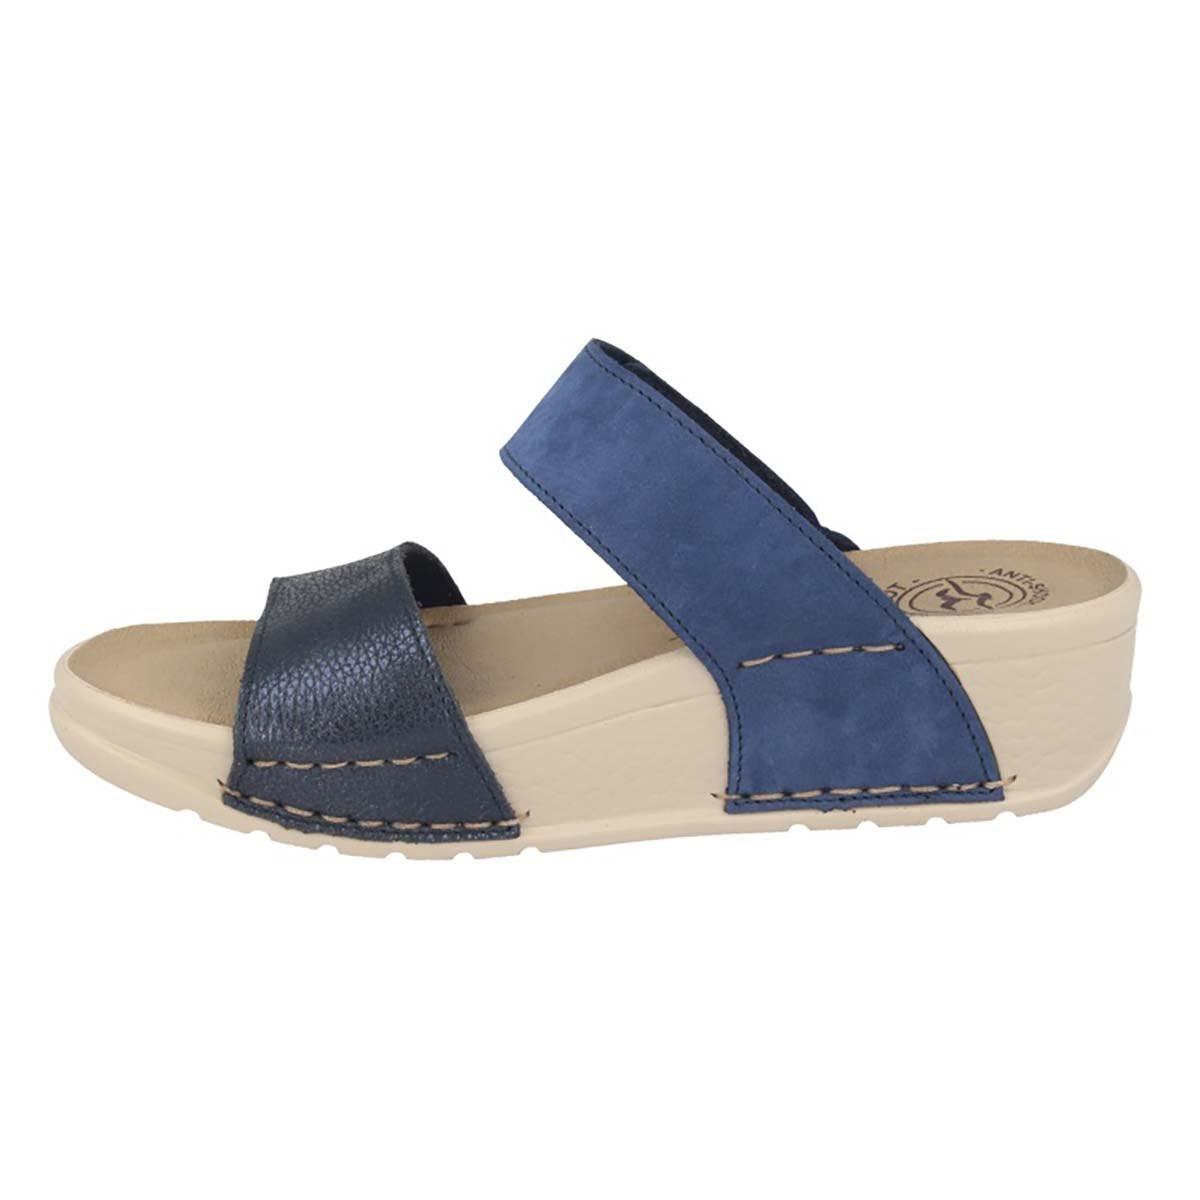 See the Velcro Leather Two Strap Slide Women Sandals With Faux Leather Insole in the colour BLUE, available in various sizes